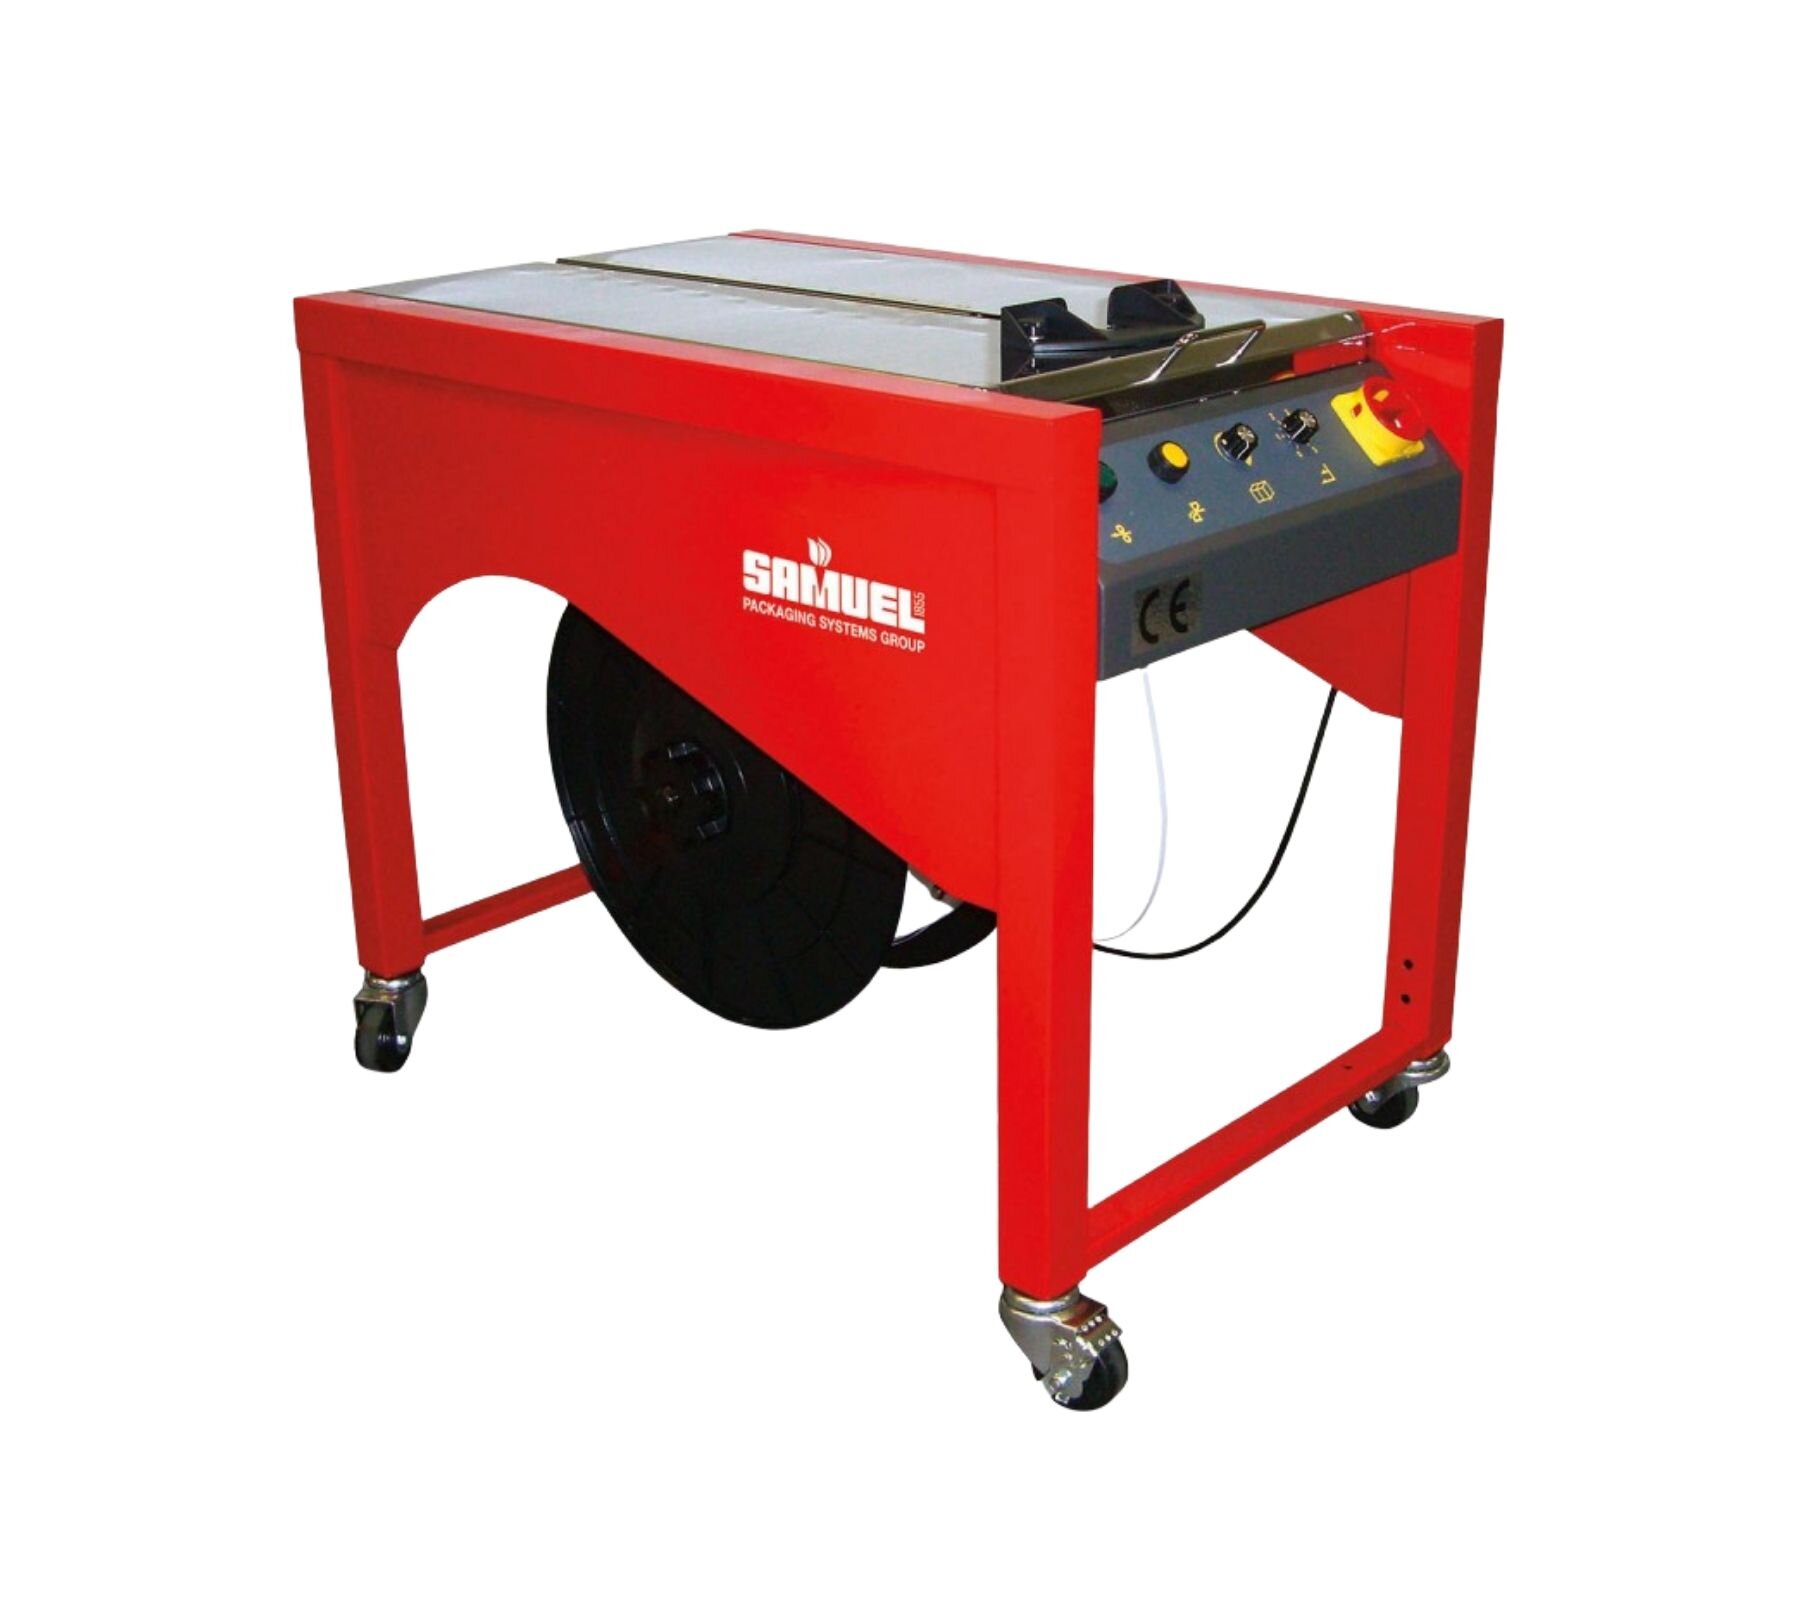 Strapping Systems - We offer a full-line of automatic, semi-automatic and custom strapping machines for almost every industry, application and budget. Our model range contains machines designed to strap almost any size or type of parcel in a variety of different configurations.